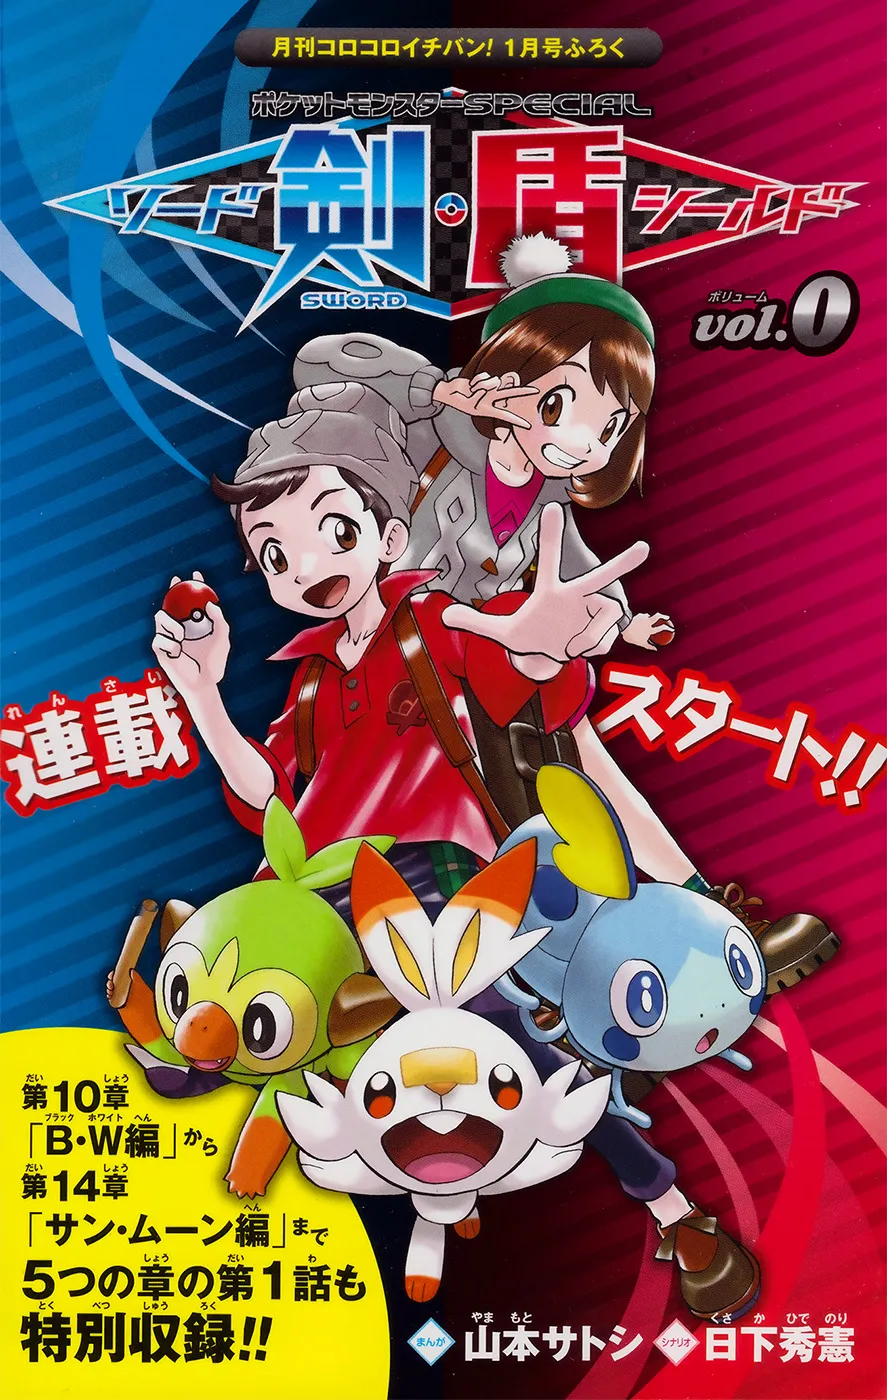 POKéMON SPECIAL SWORD AND SHIELD THUMBNAIL